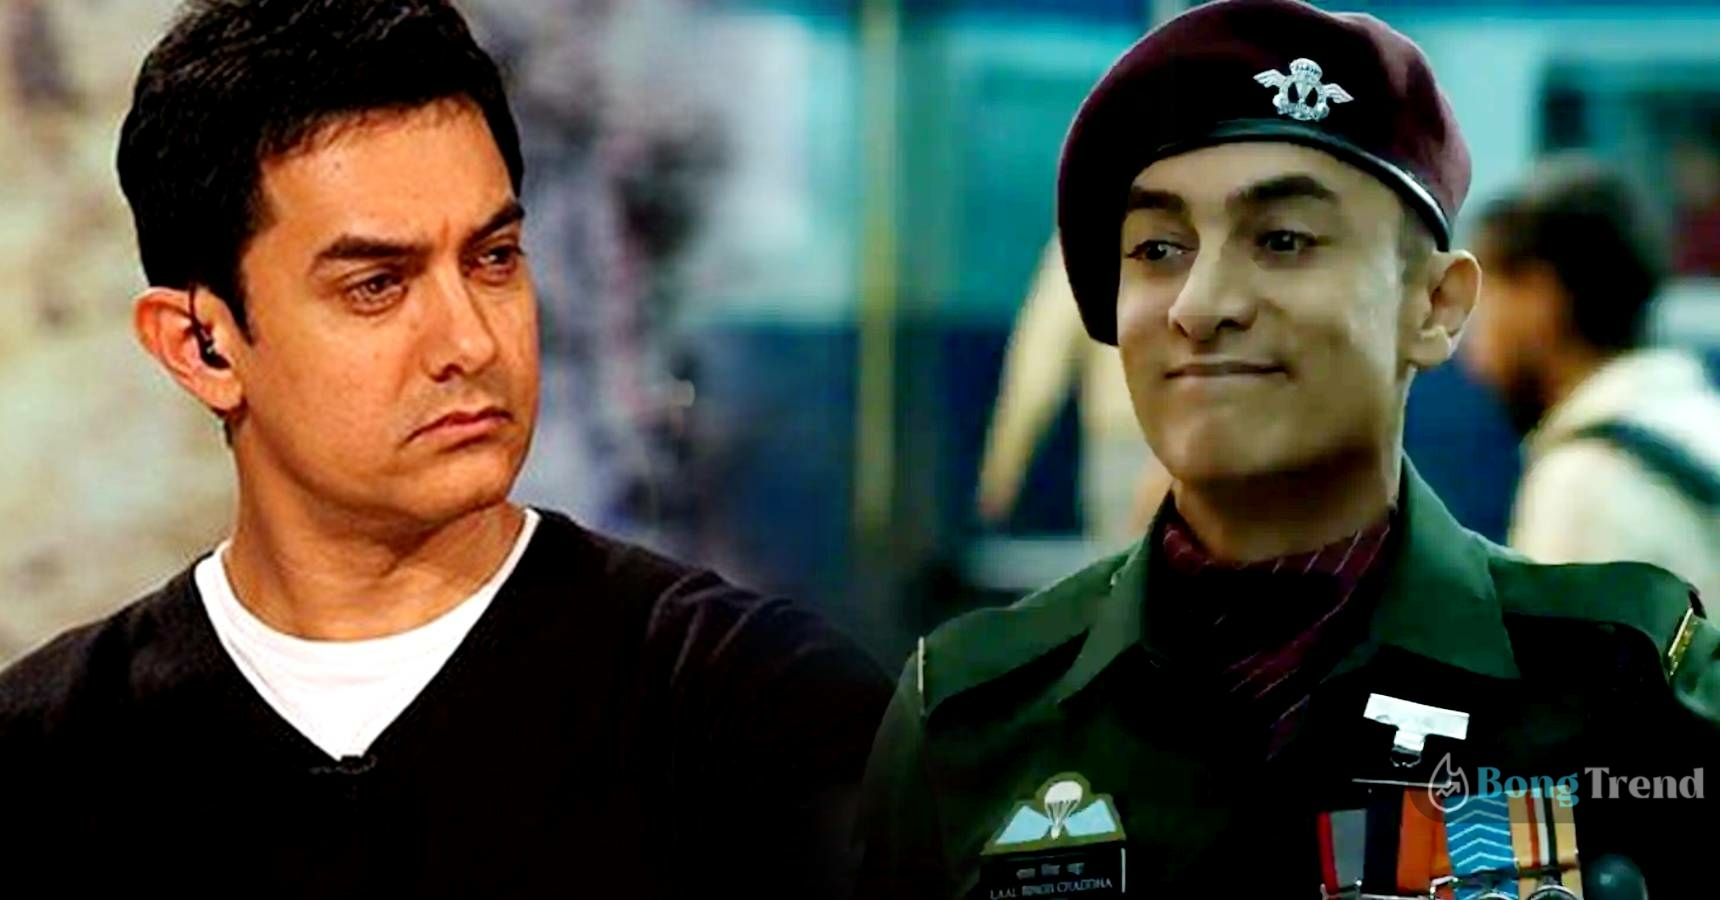 A lawyer complaints against Aamir Khan and others for disrespecting Indian Army in Laal Singh Chaddha